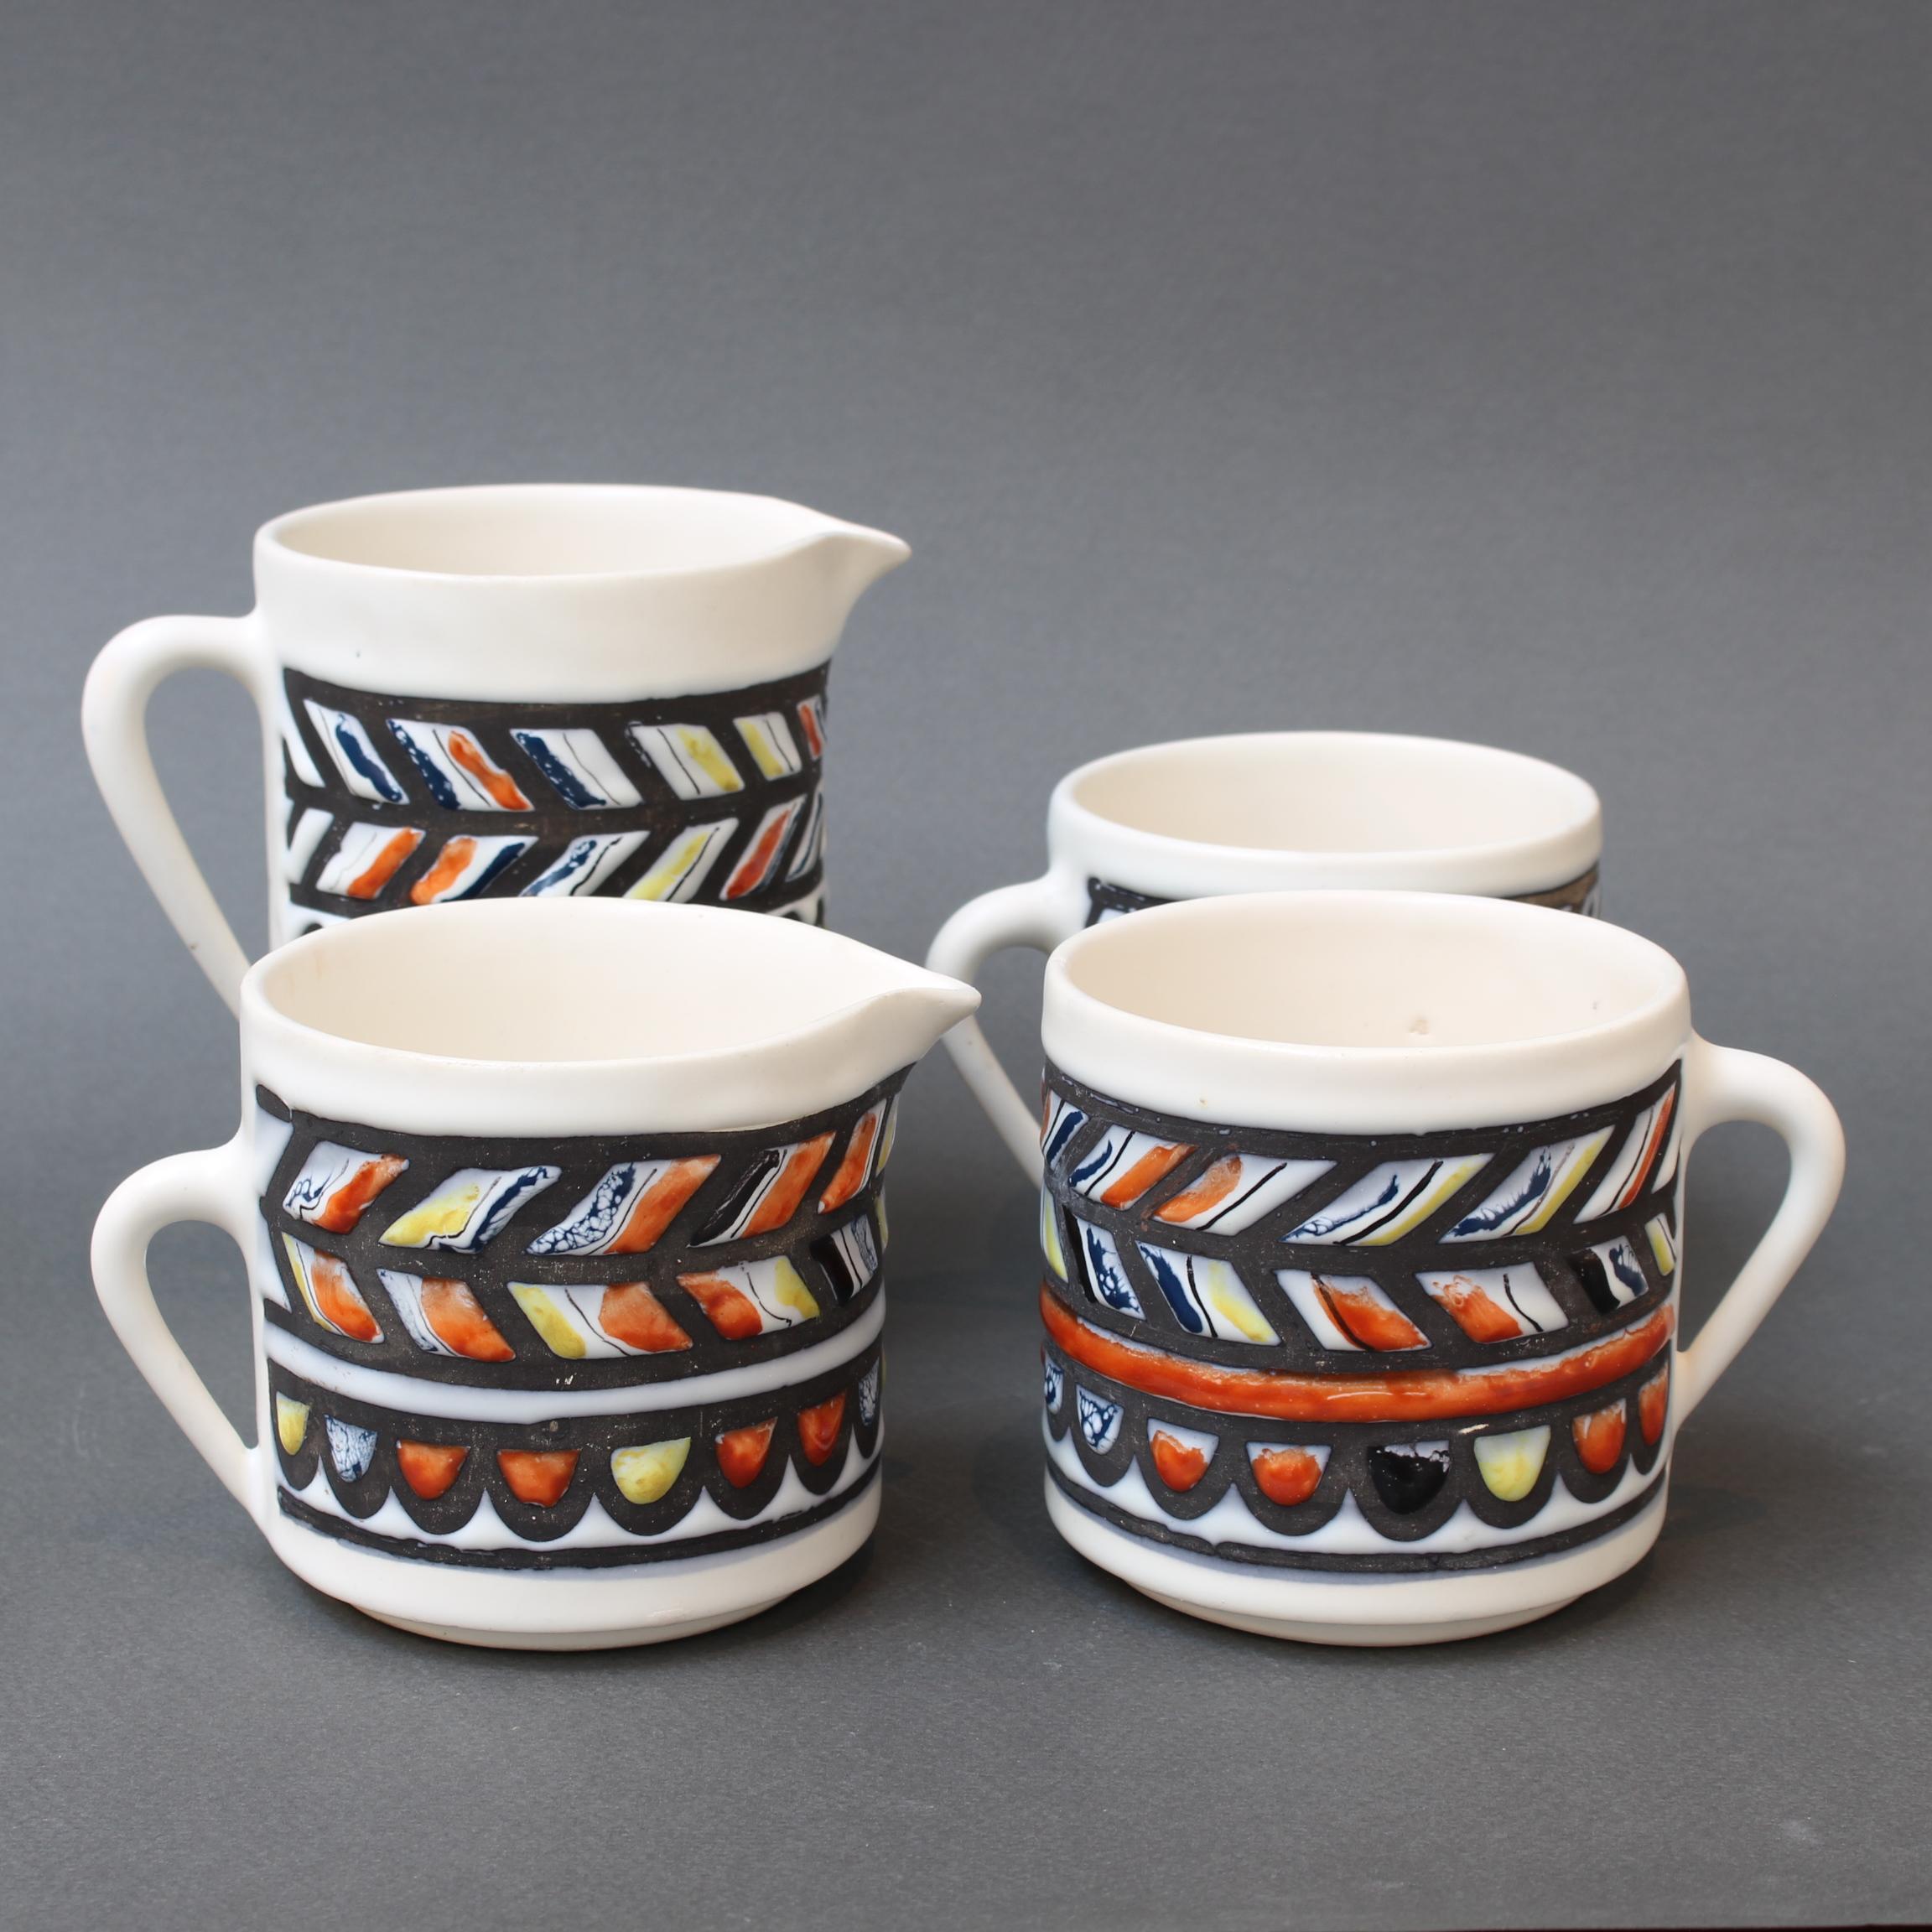 Vintage French Ceramic Set of Vessels by Roger Capron (circa 1960s) For Sale 15